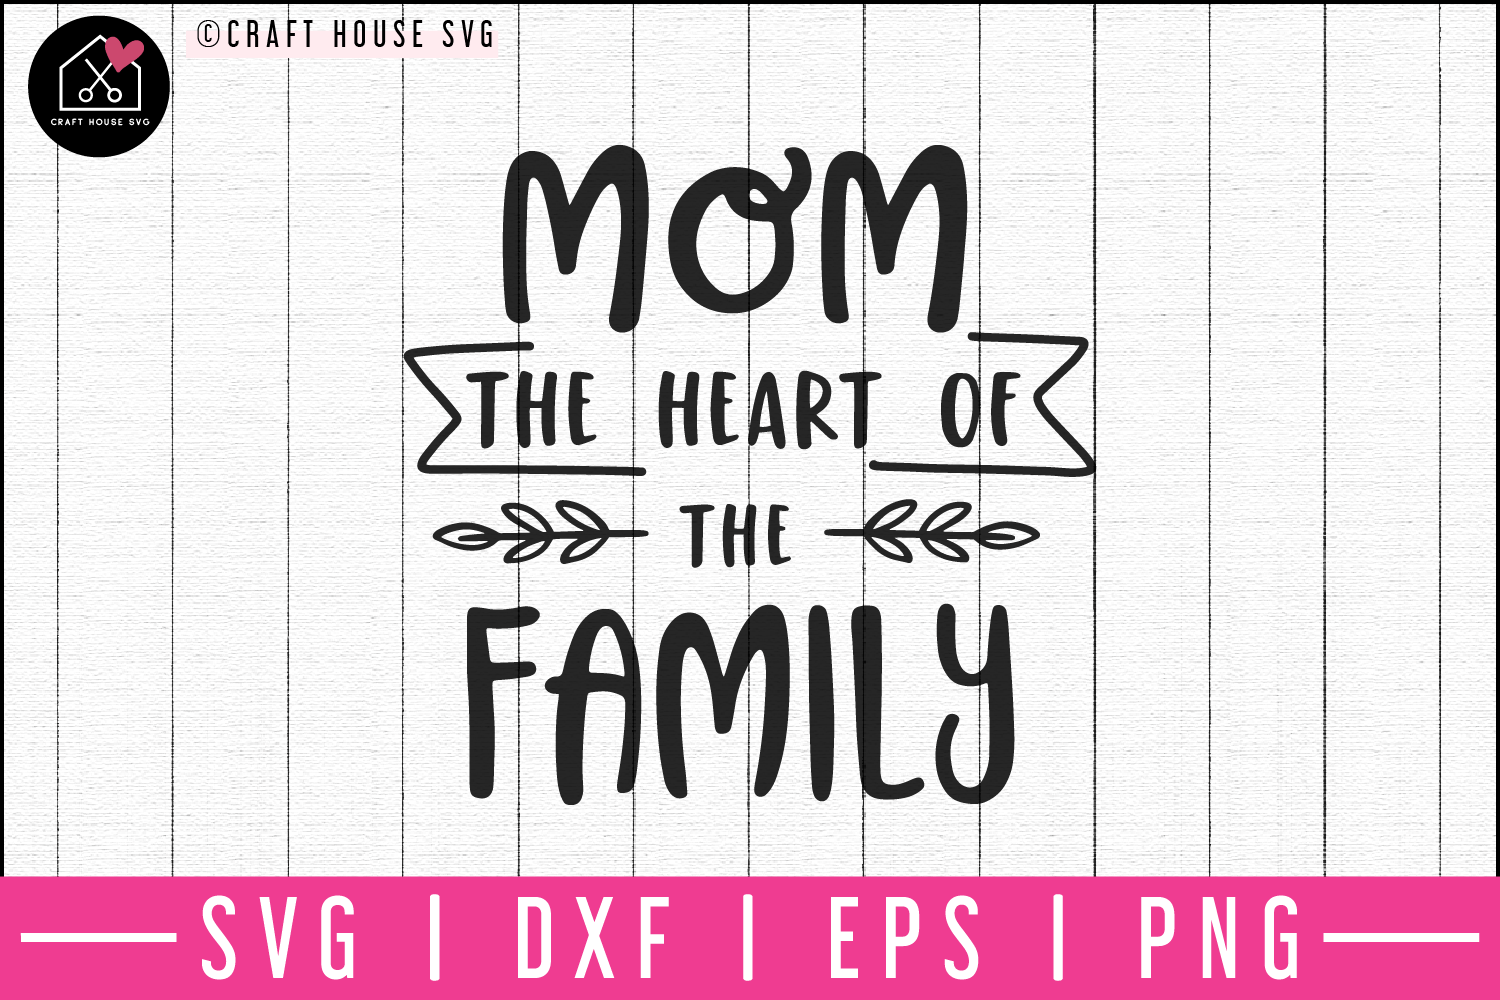 Mom the heart of the family SVG | M52F Craft House SVG - SVG files for Cricut and Silhouette